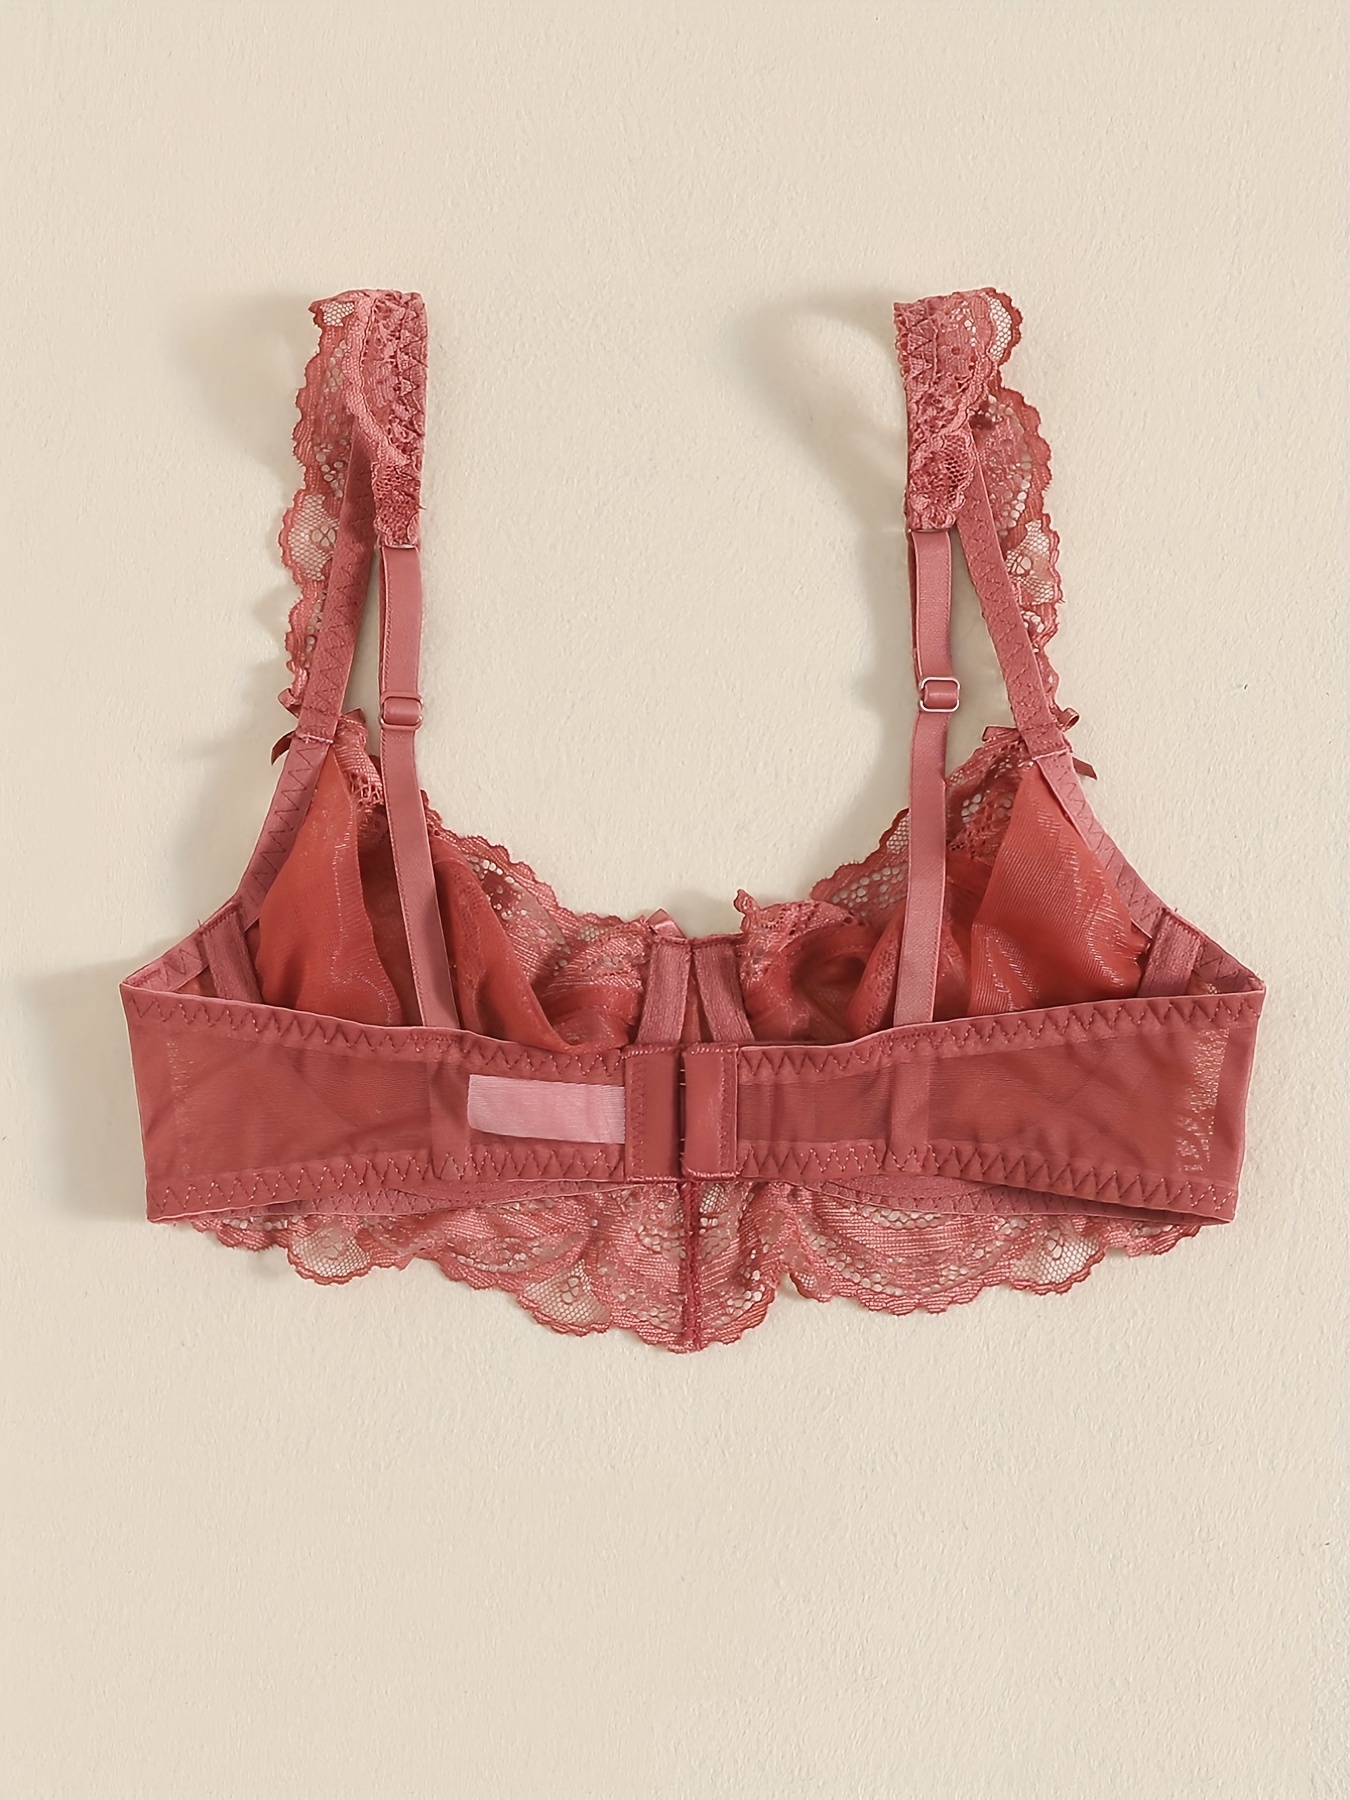 Plus Lace Panel Bow Front Scallop Trim Push Up Bra  Model off duty  outfits, Pink collars, Plus size bra